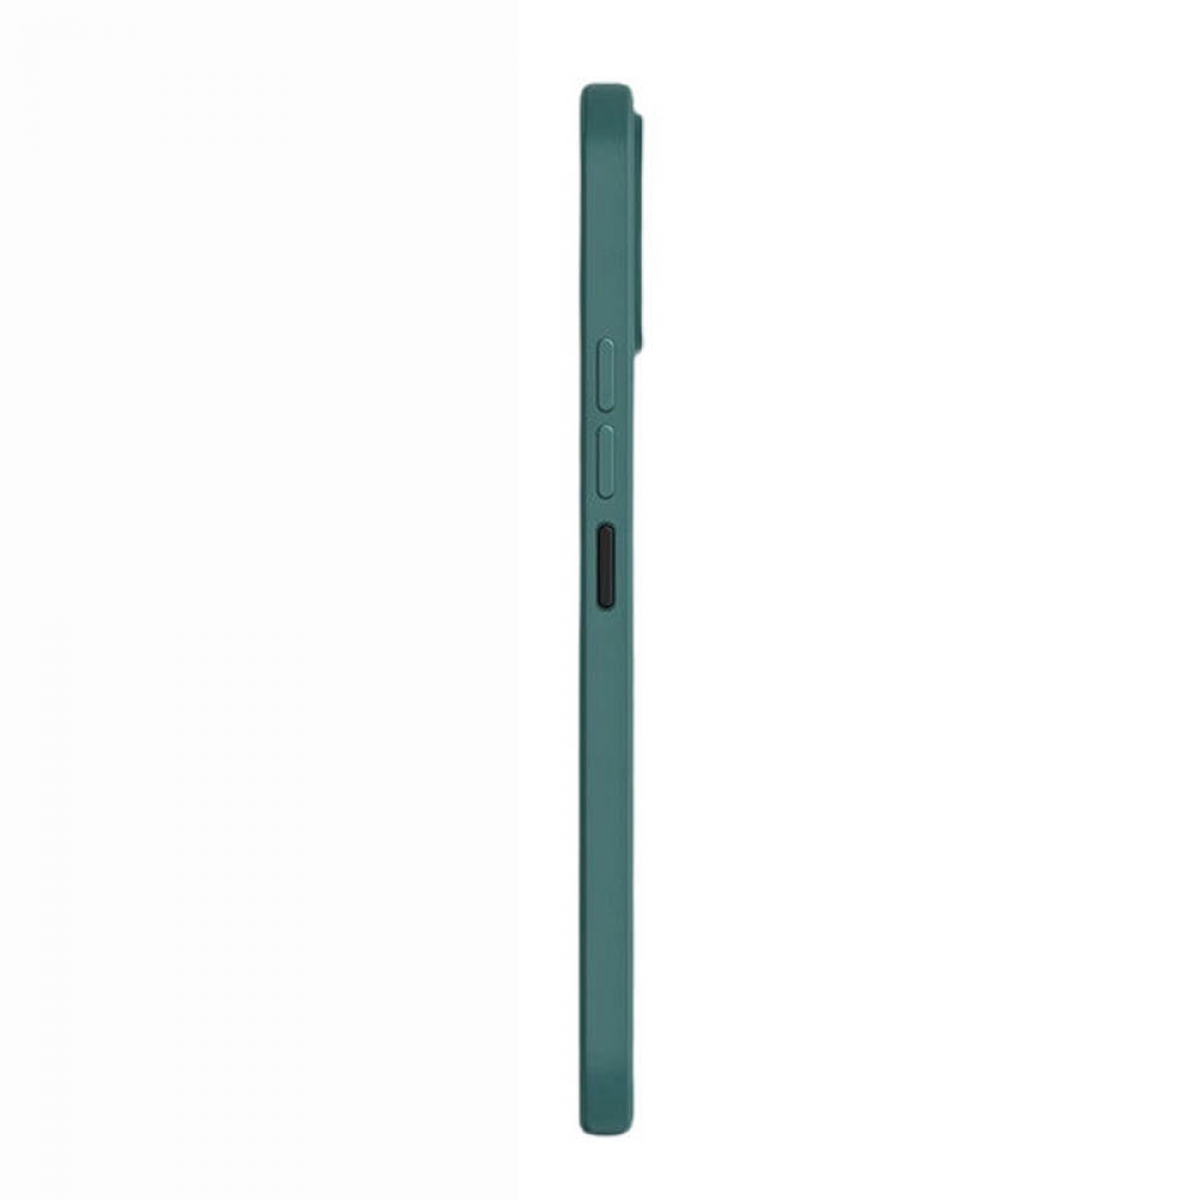 CASEONLINE Liquid Hülle, Backcover, Green Pine OnePlus, 5G, 10 Pro